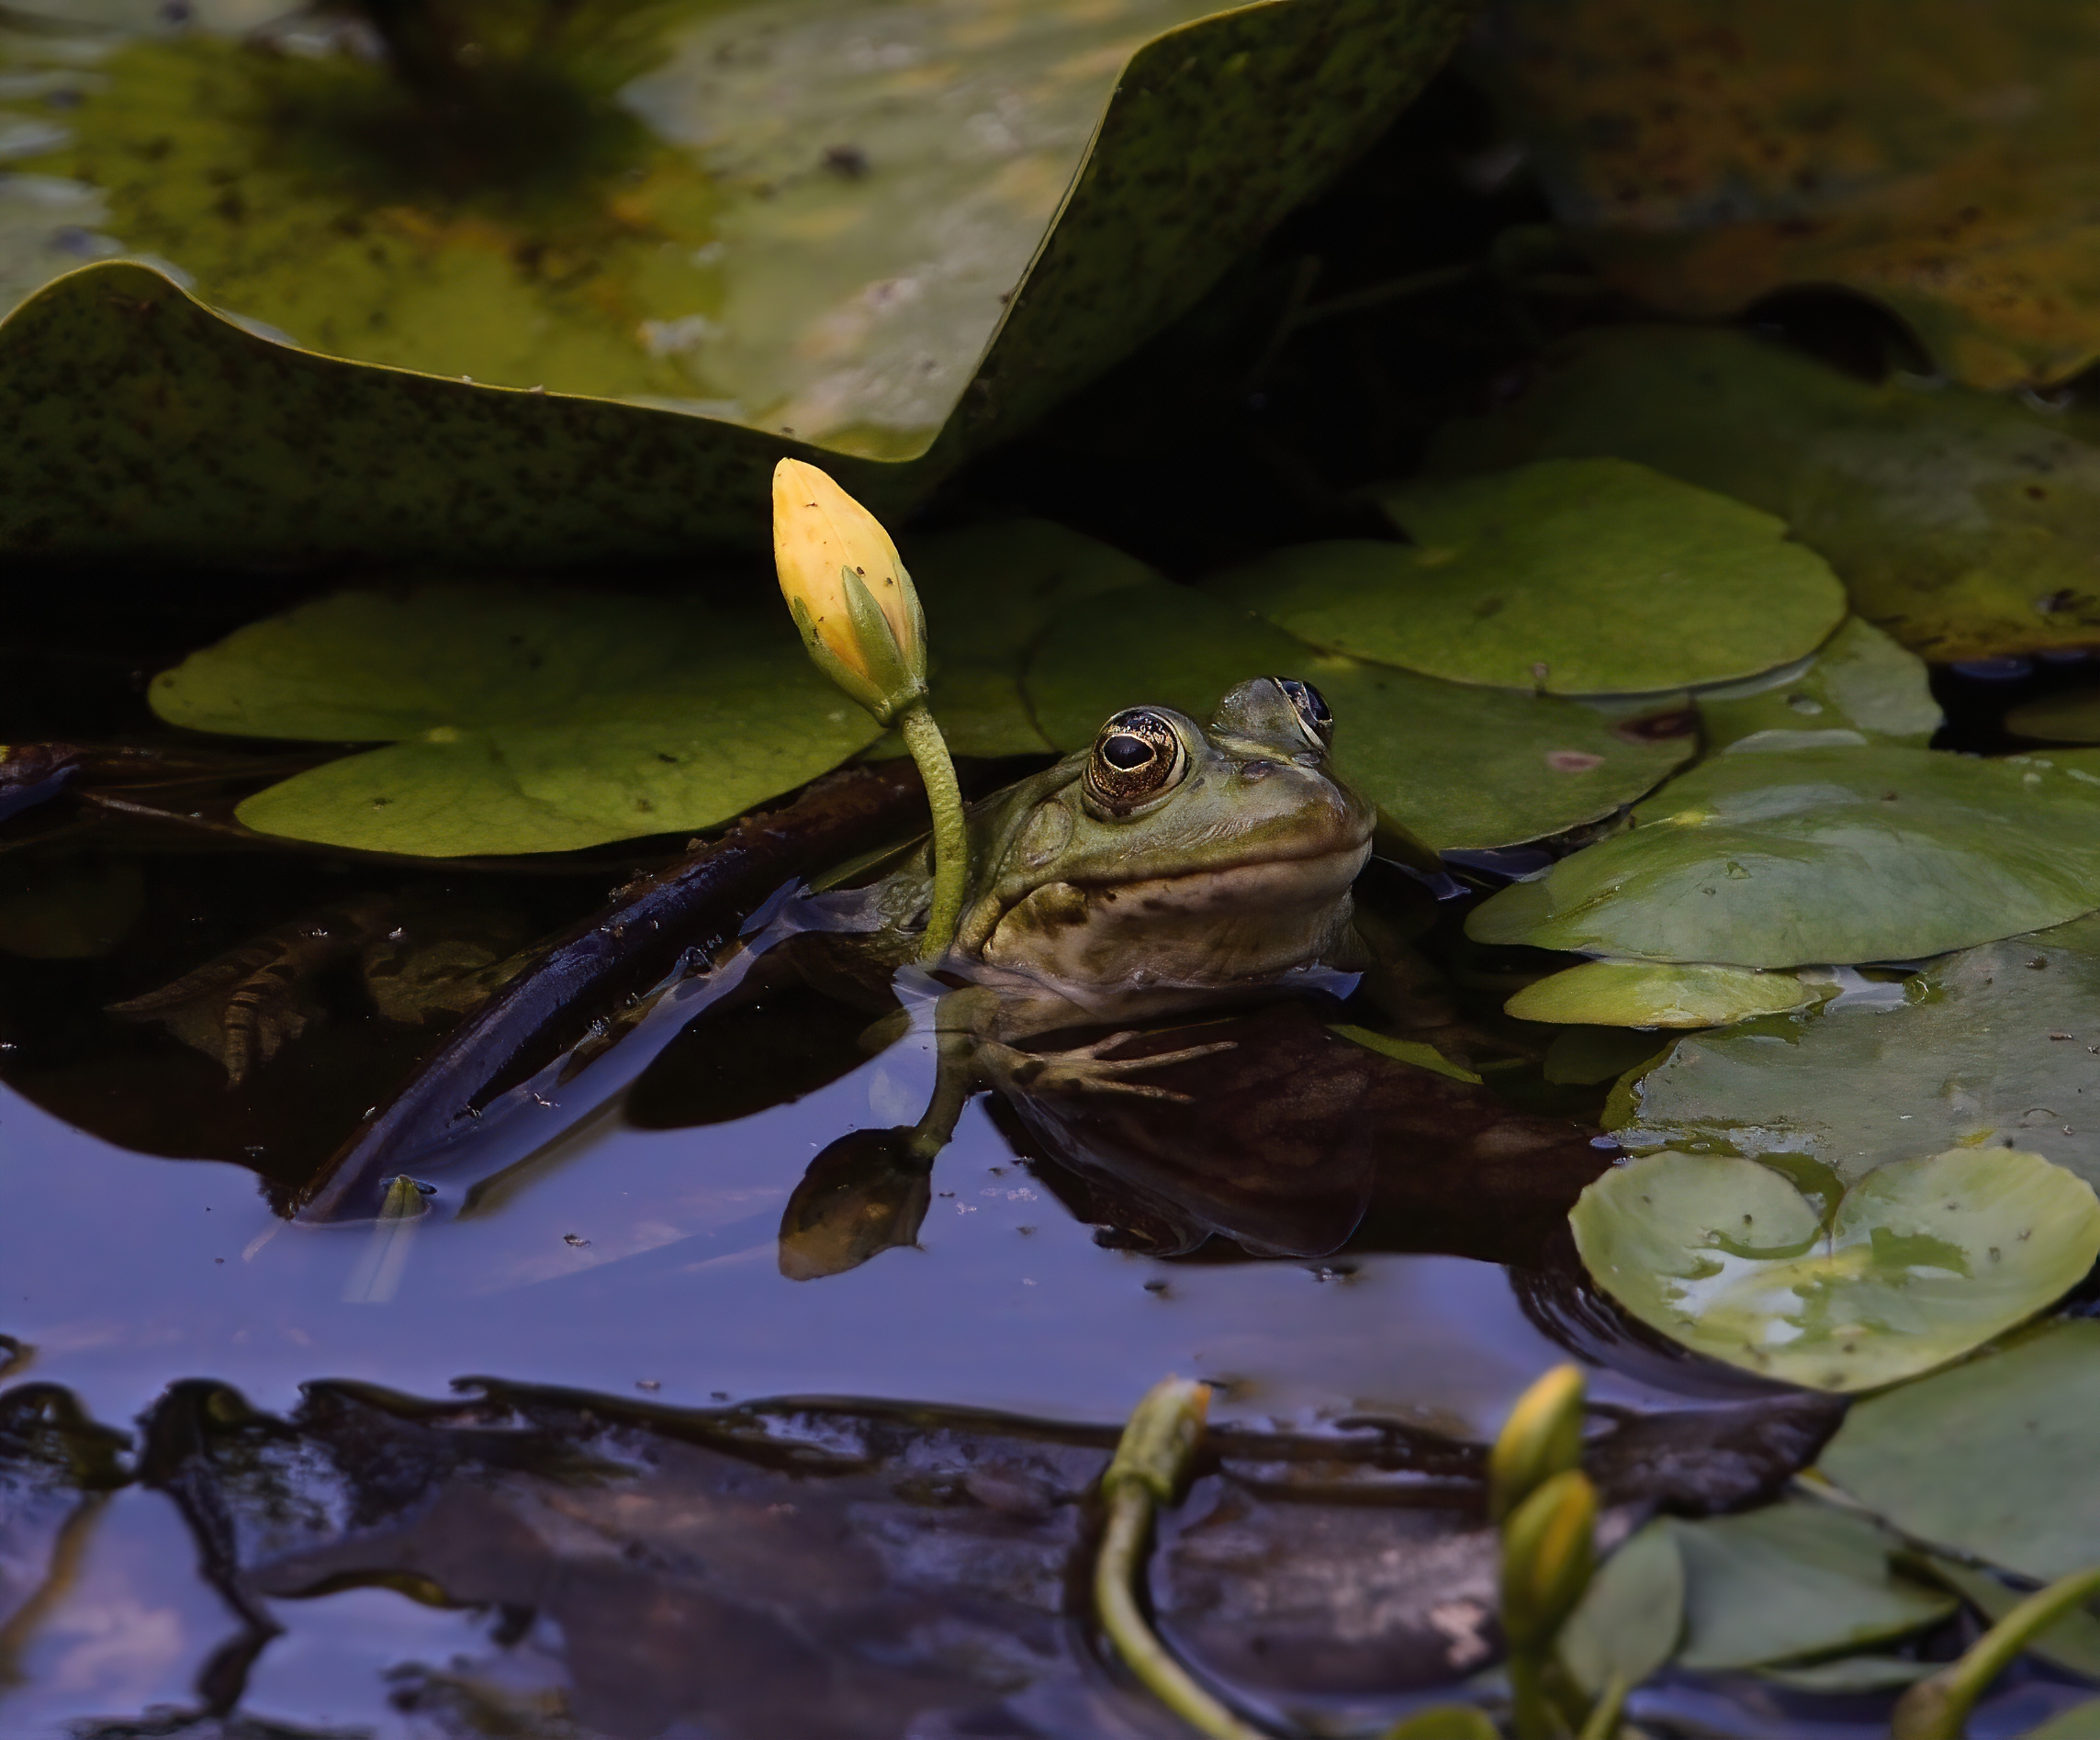 The Frog and the Water Lily...